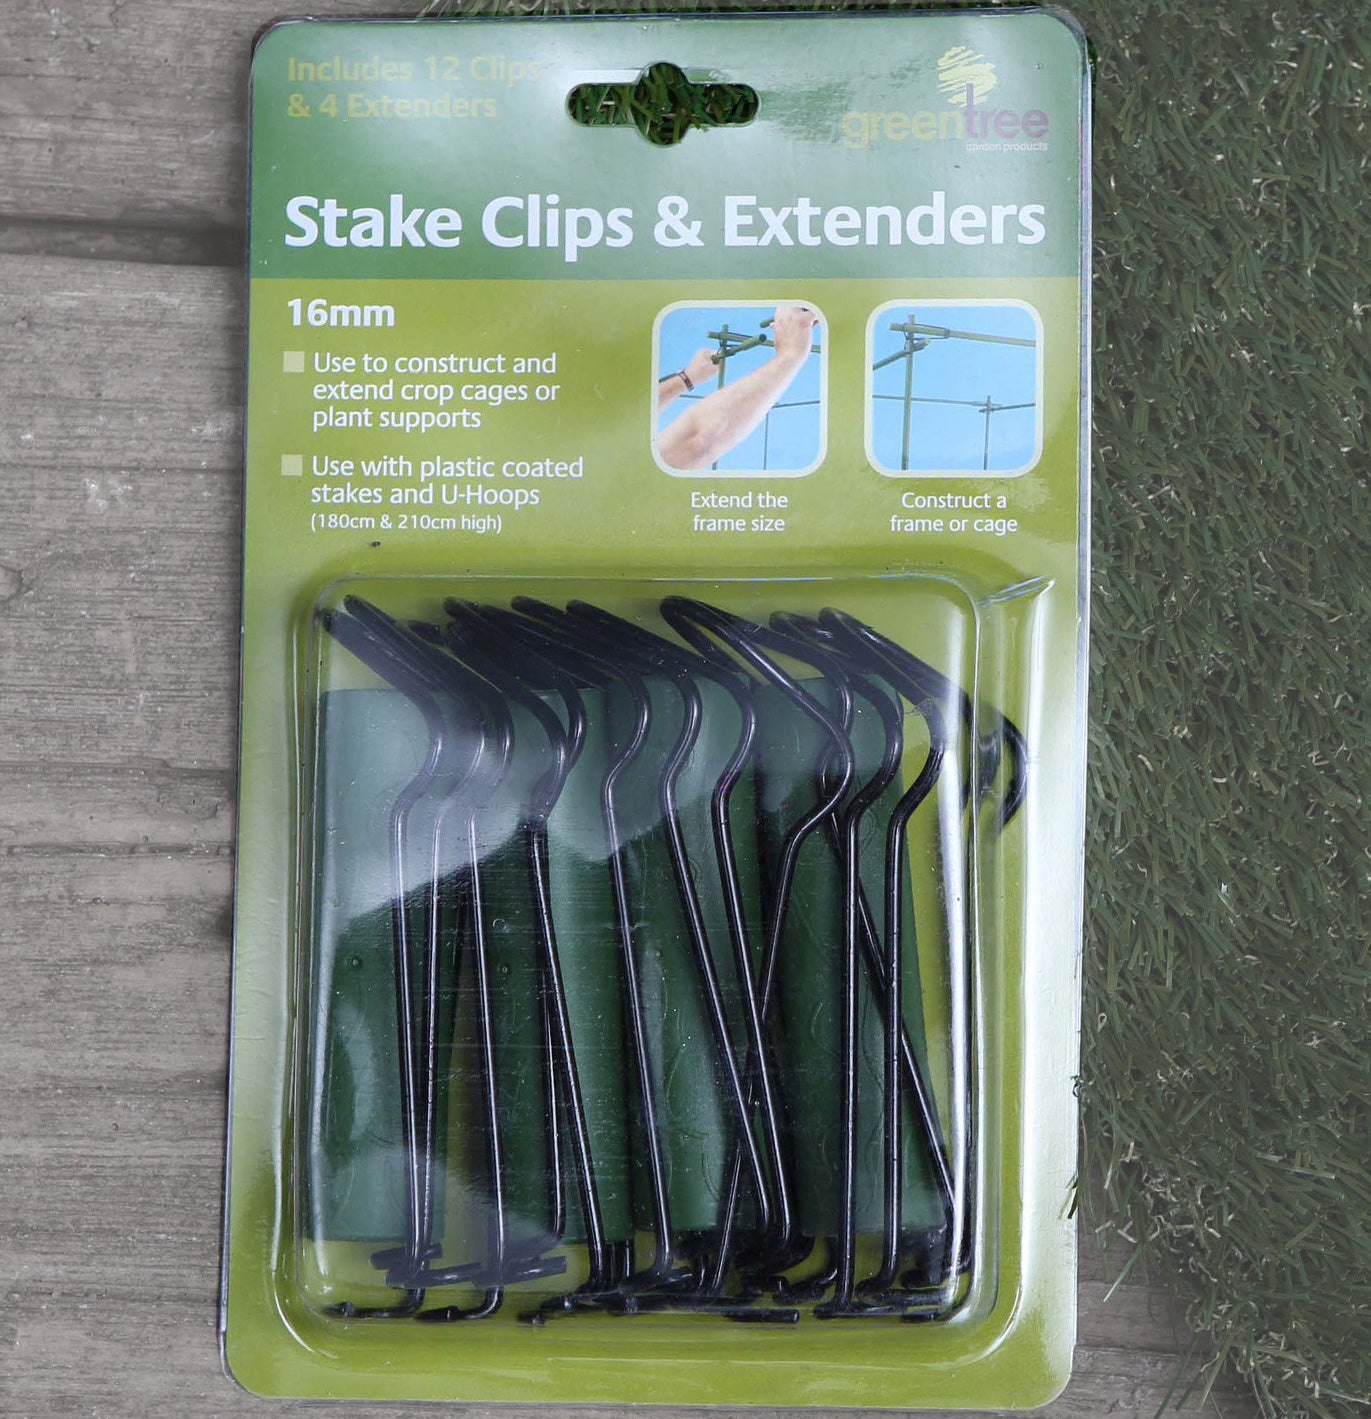 Green Tree Stake Clips & Extenders 16mm (12 clips & 4 extenders)